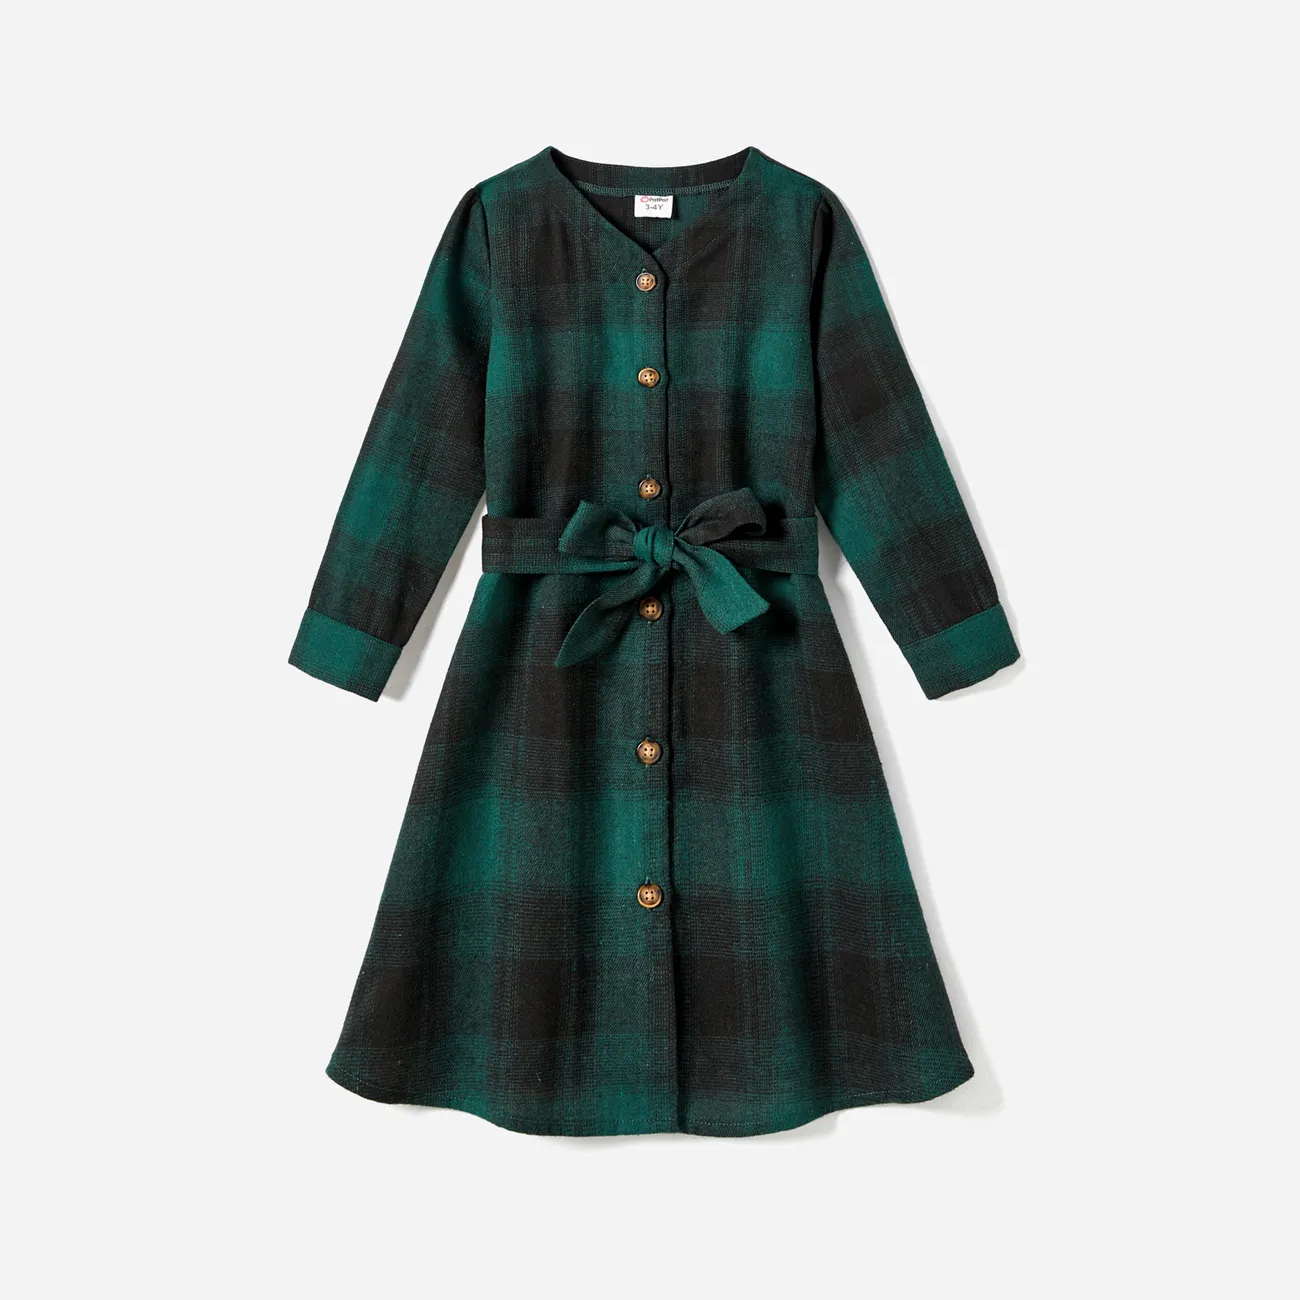 Family Matching Casual Plaid Long-sleeve Belted Dresses & Tops Sets Dark Green big image 1